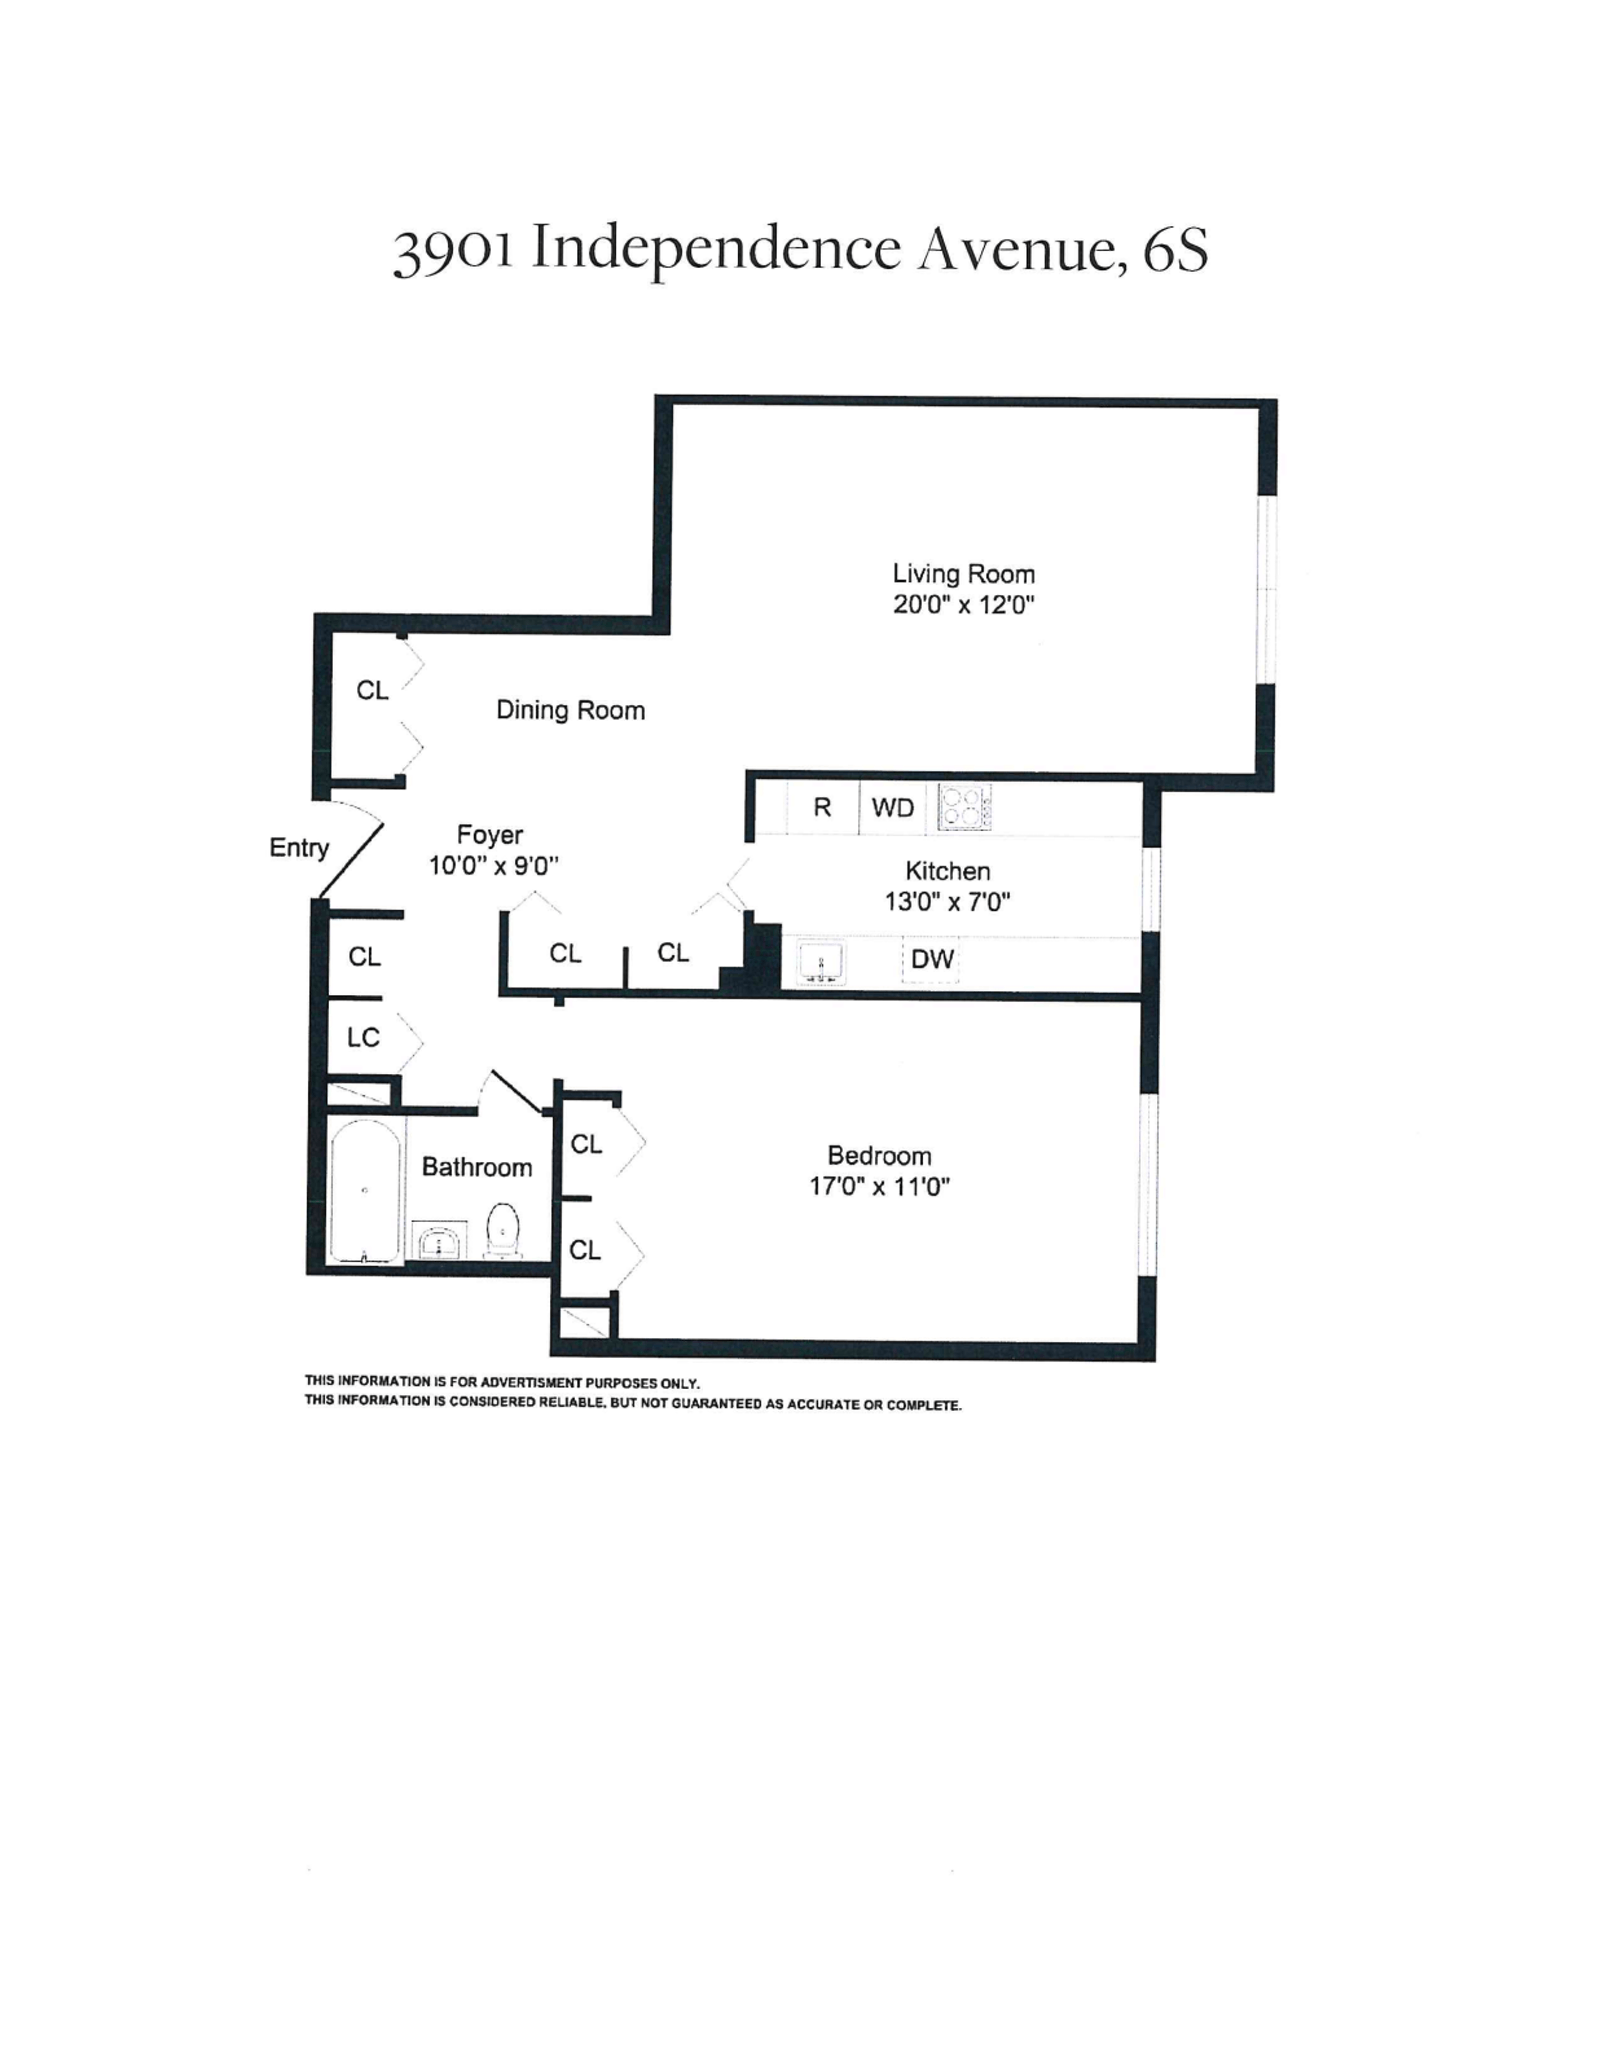 Floorplan for 3901 Independence Avenue, 6S